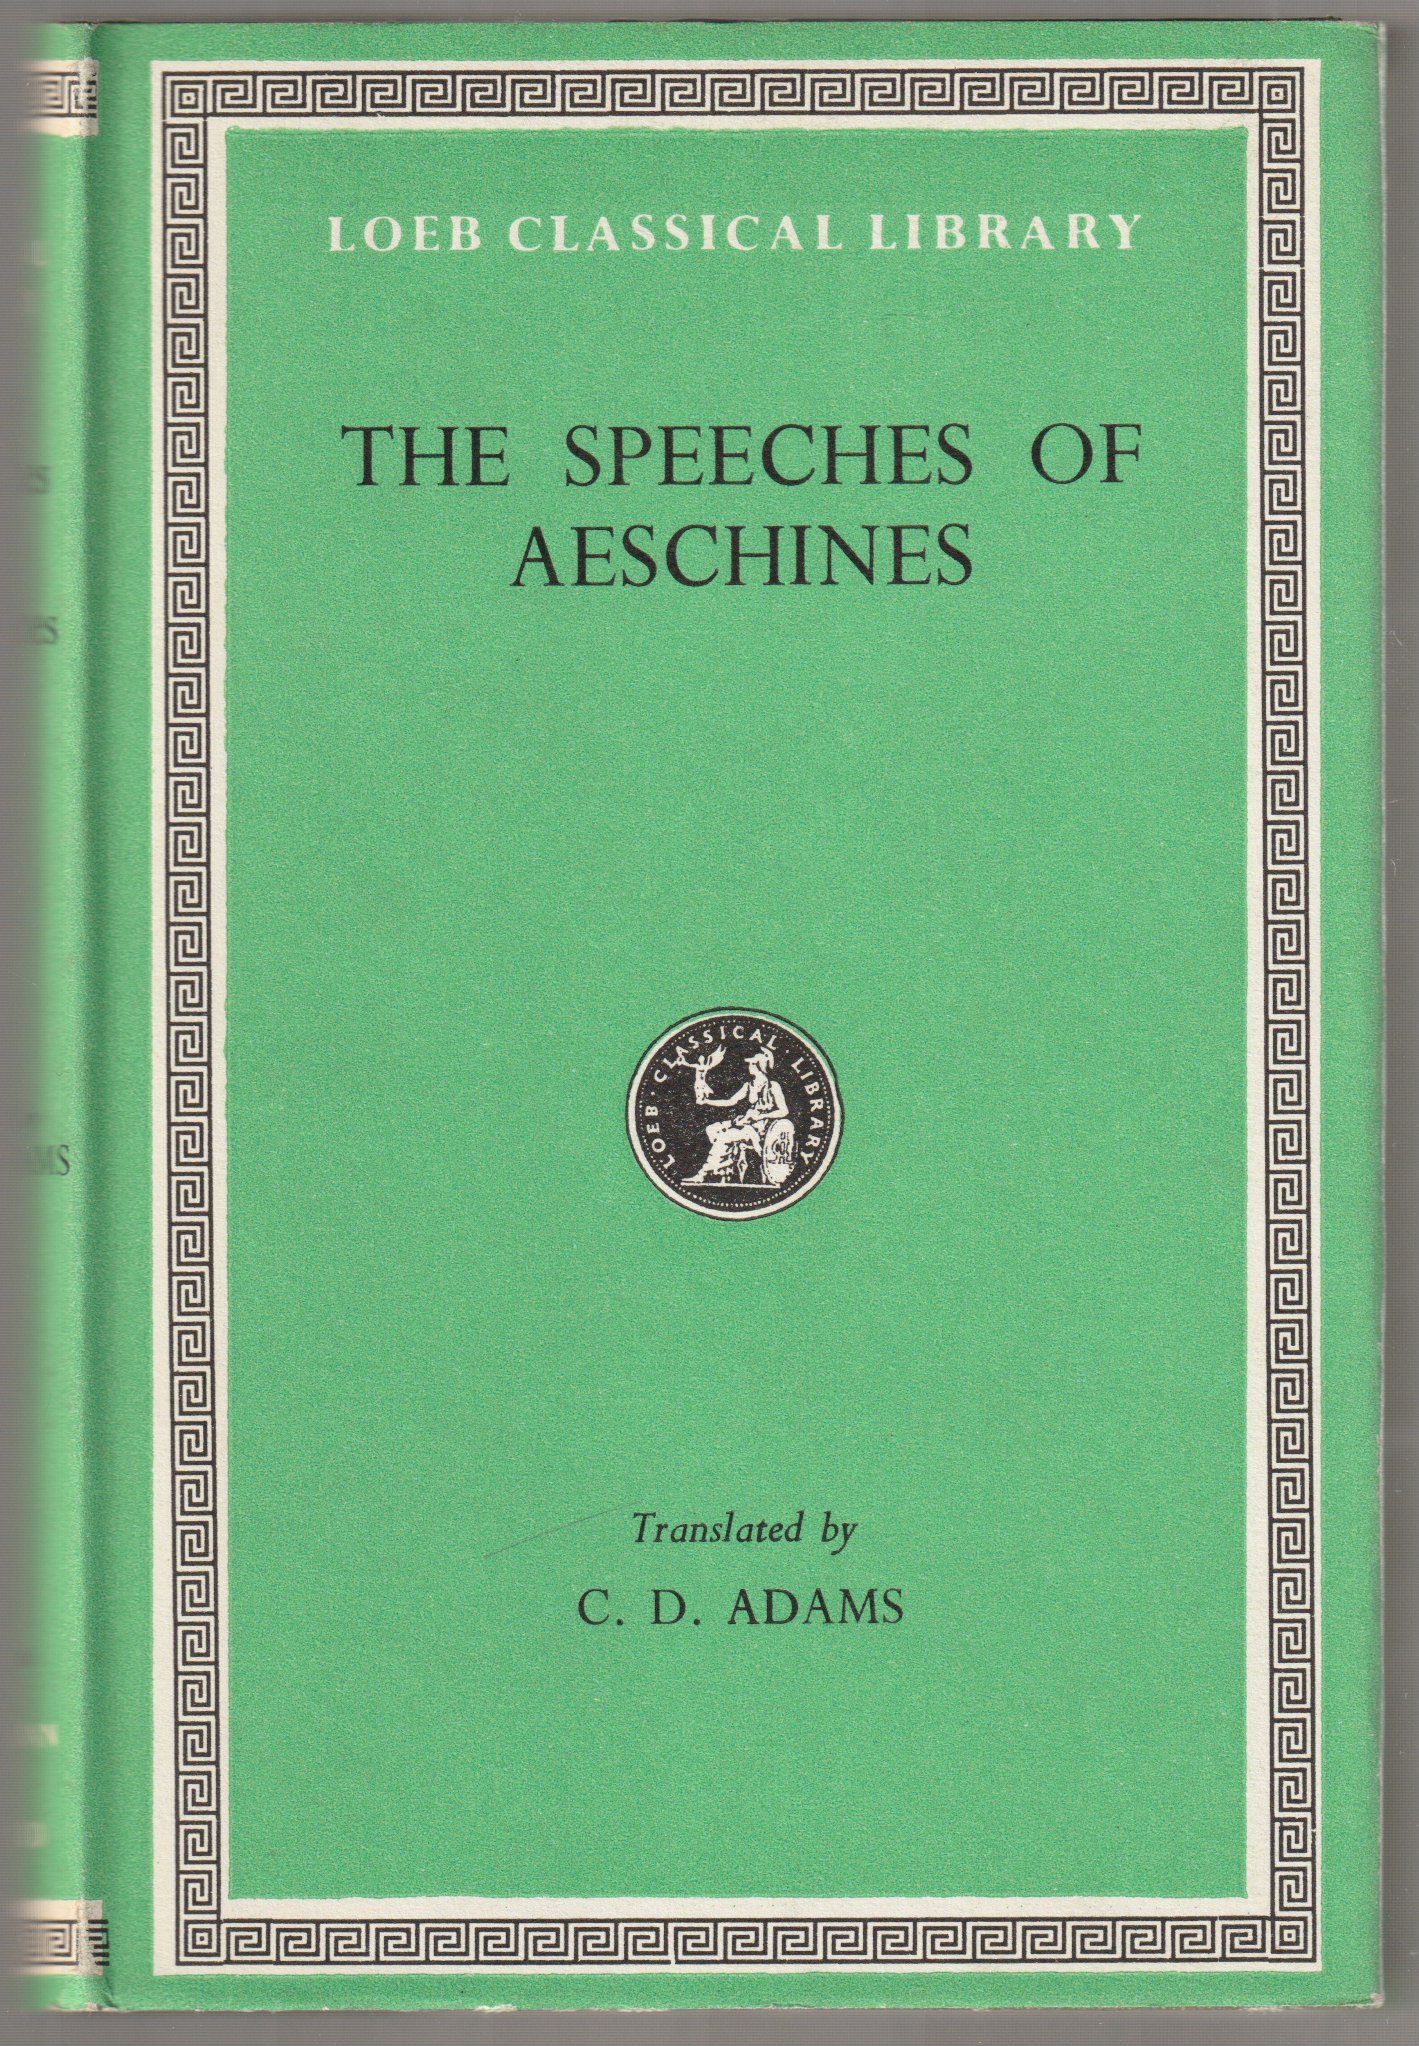 The speeches of Aeschines, Against Timarchus ; On the embassy ; Against Ctesiphon.